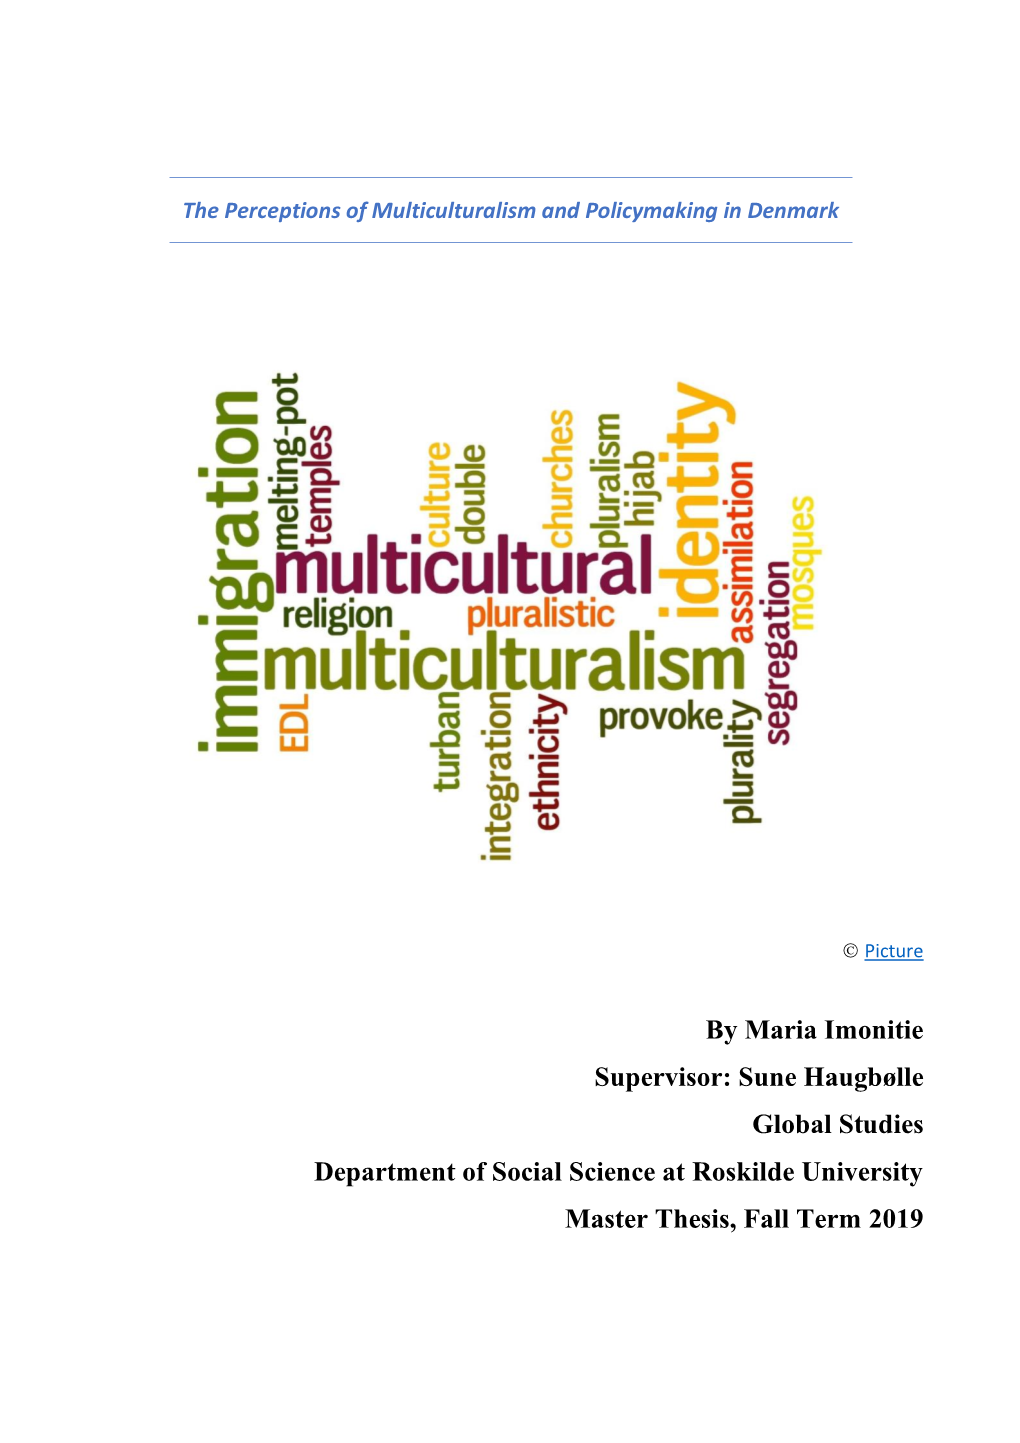 By Maria Imonitie Supervisor: Sune Haugbølle Global Studies Department of Social Science at Roskilde University Master Thesis, Fall Term 2019